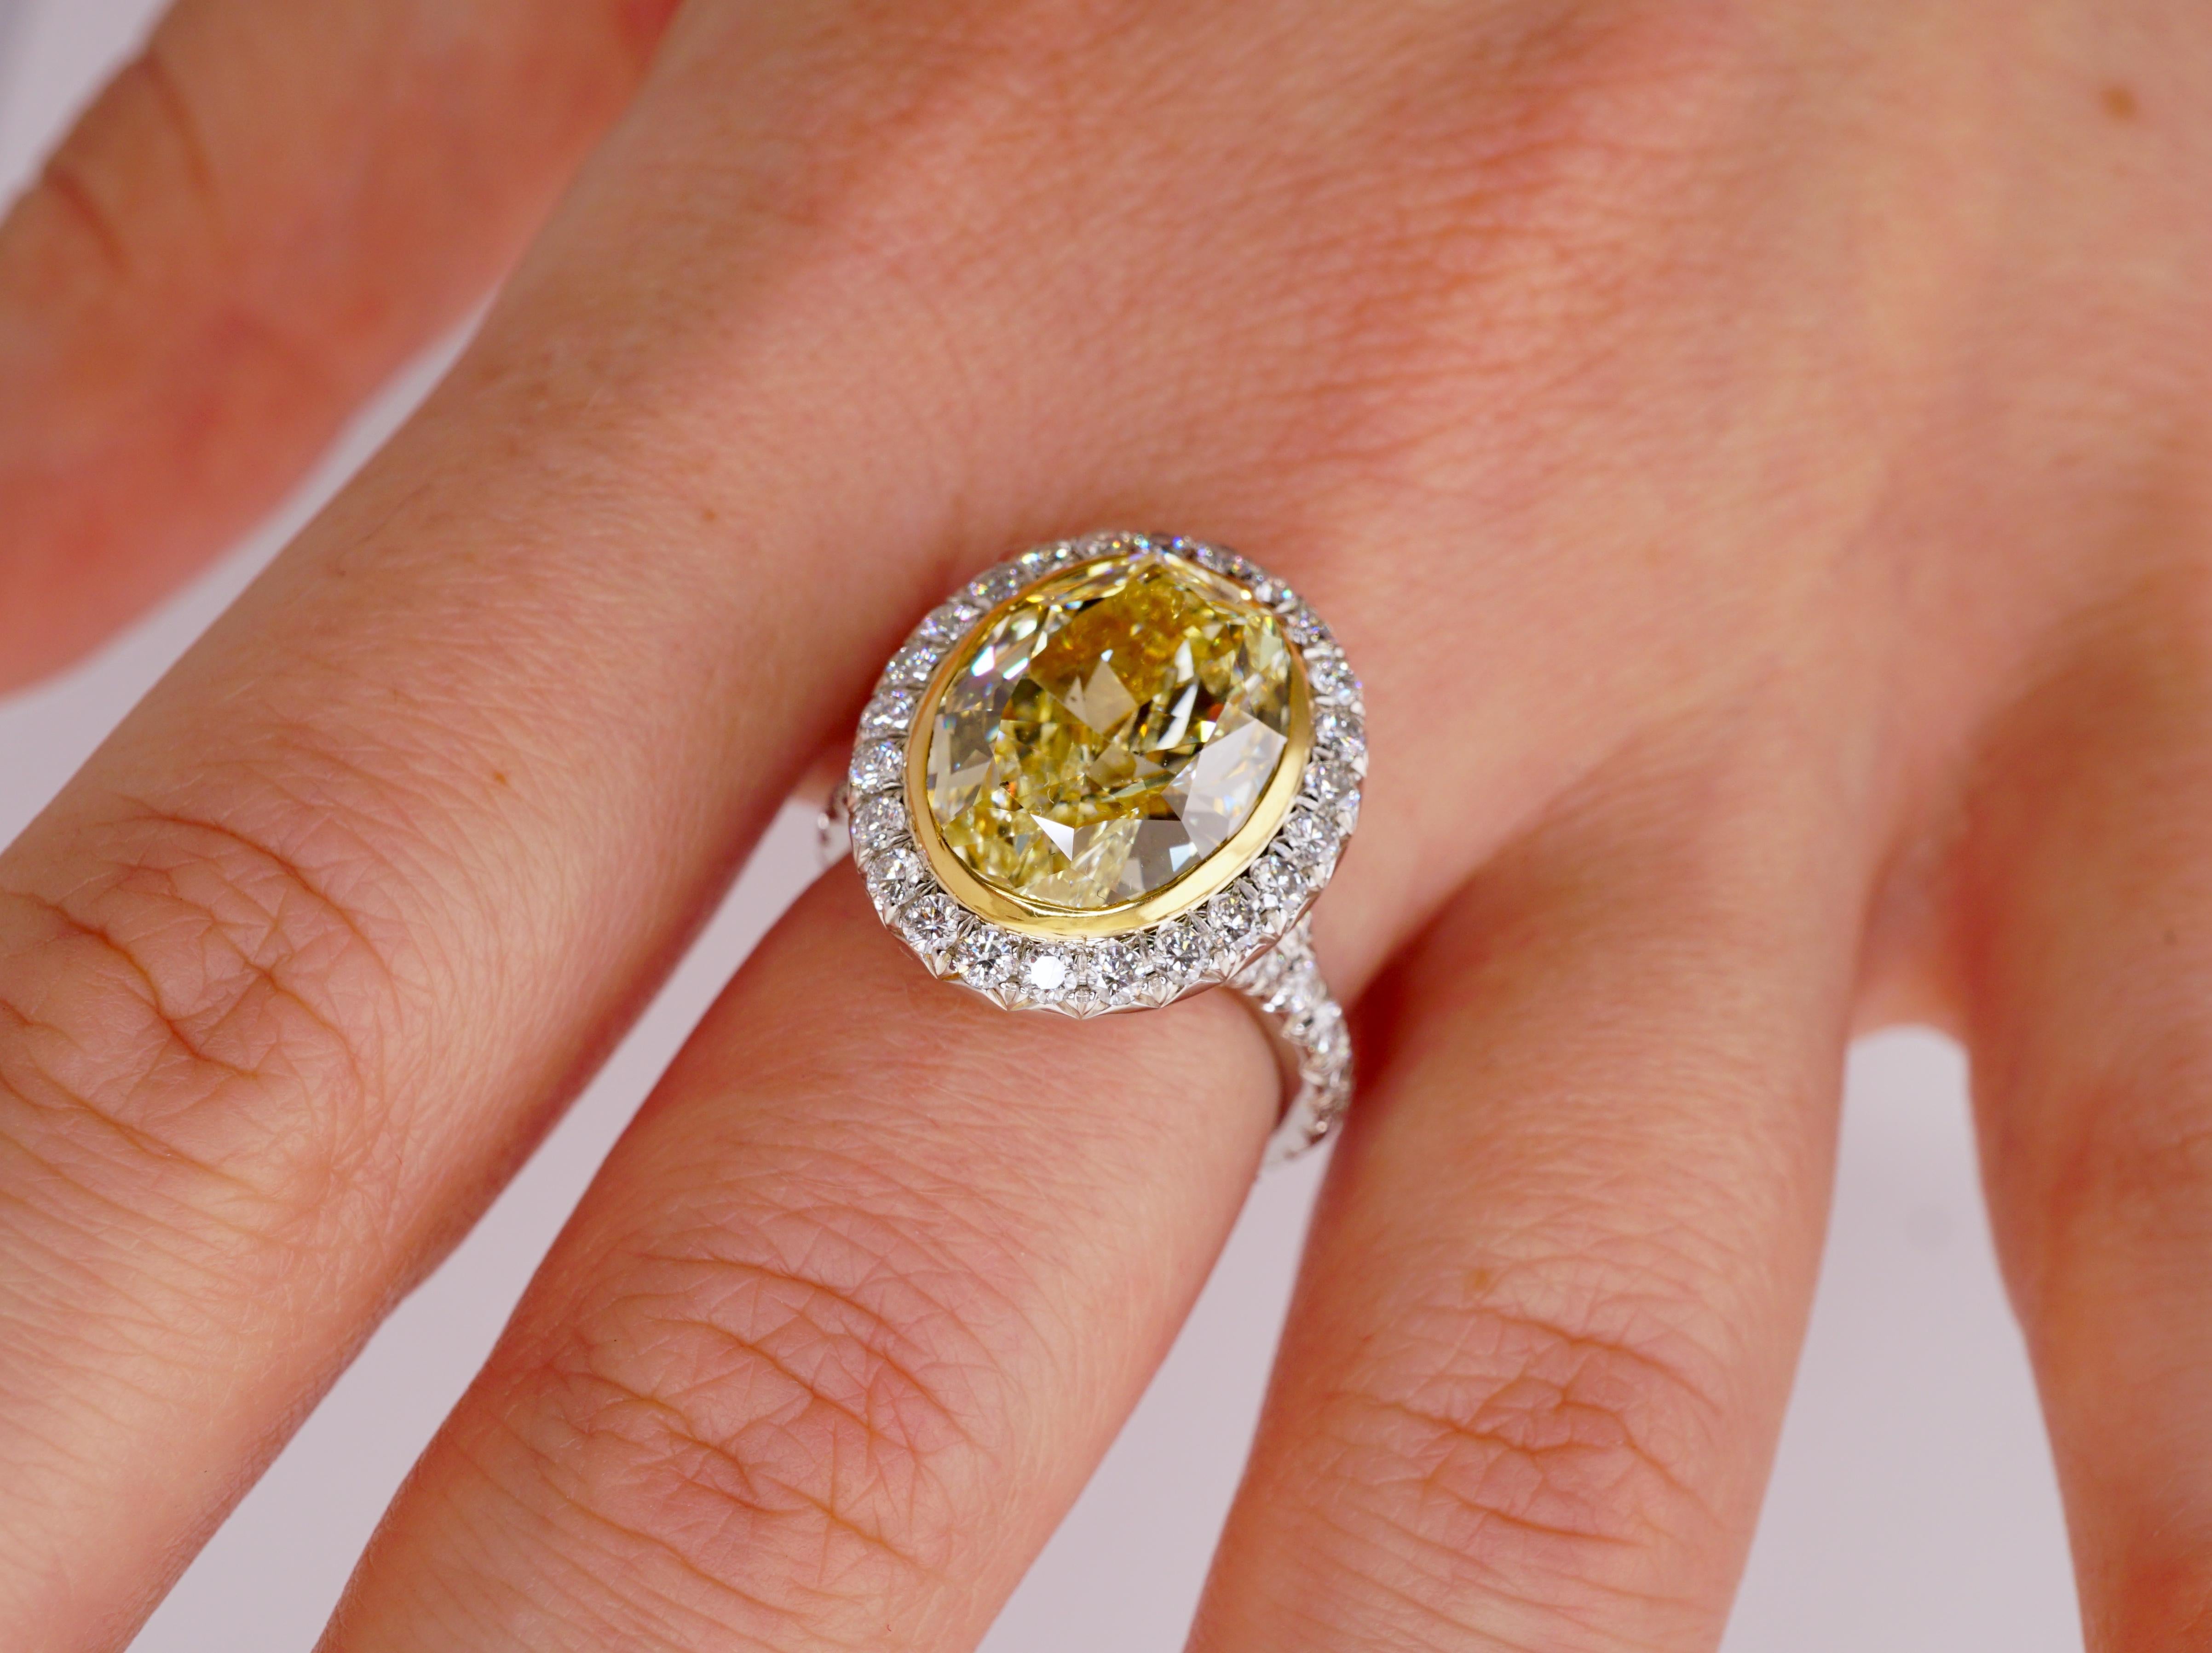 Modern GIA Certified 5.12 Ct Fancy Yellow Oval Diamond Engagement Ring in Platinum